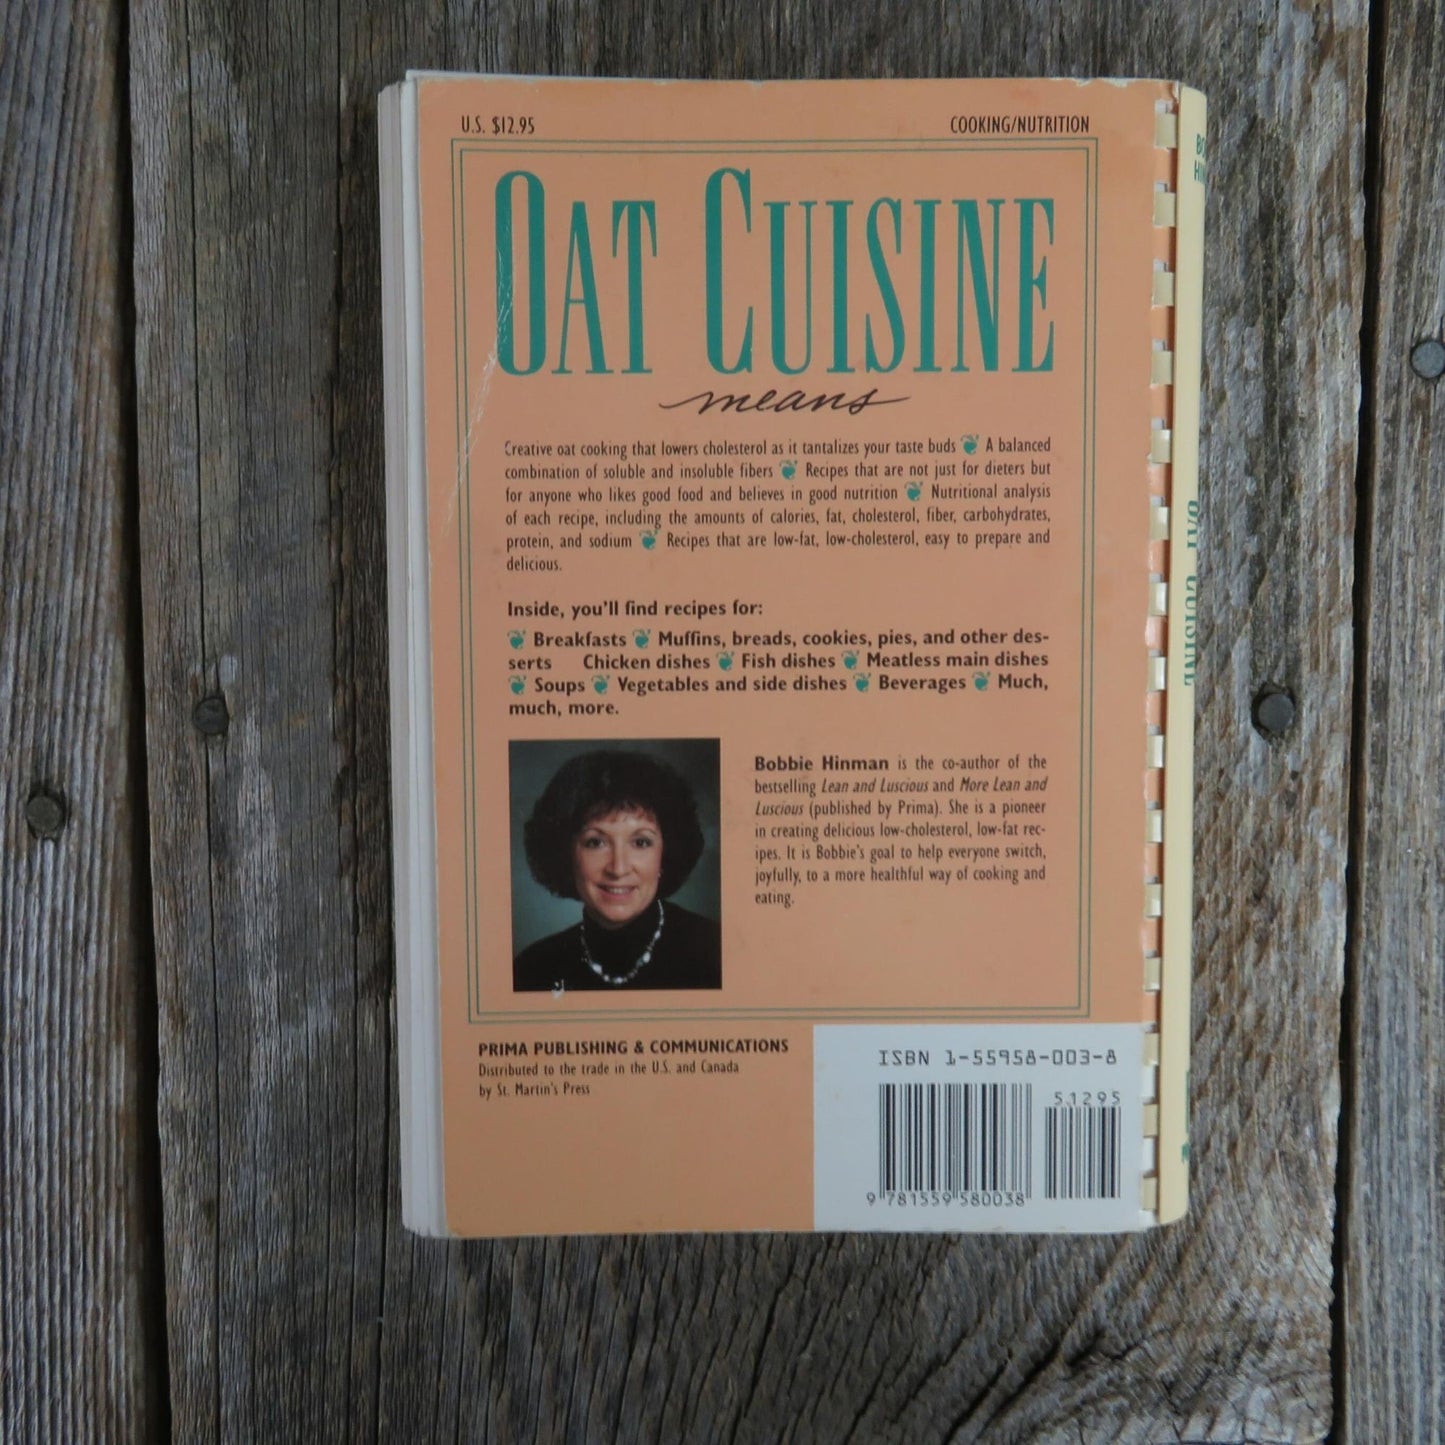 Vintage Cookbook Oat Cuisine Over 200 Delicious Recipes to Help You Lower Your Cholesterol Level Bobbie Hinman 1989